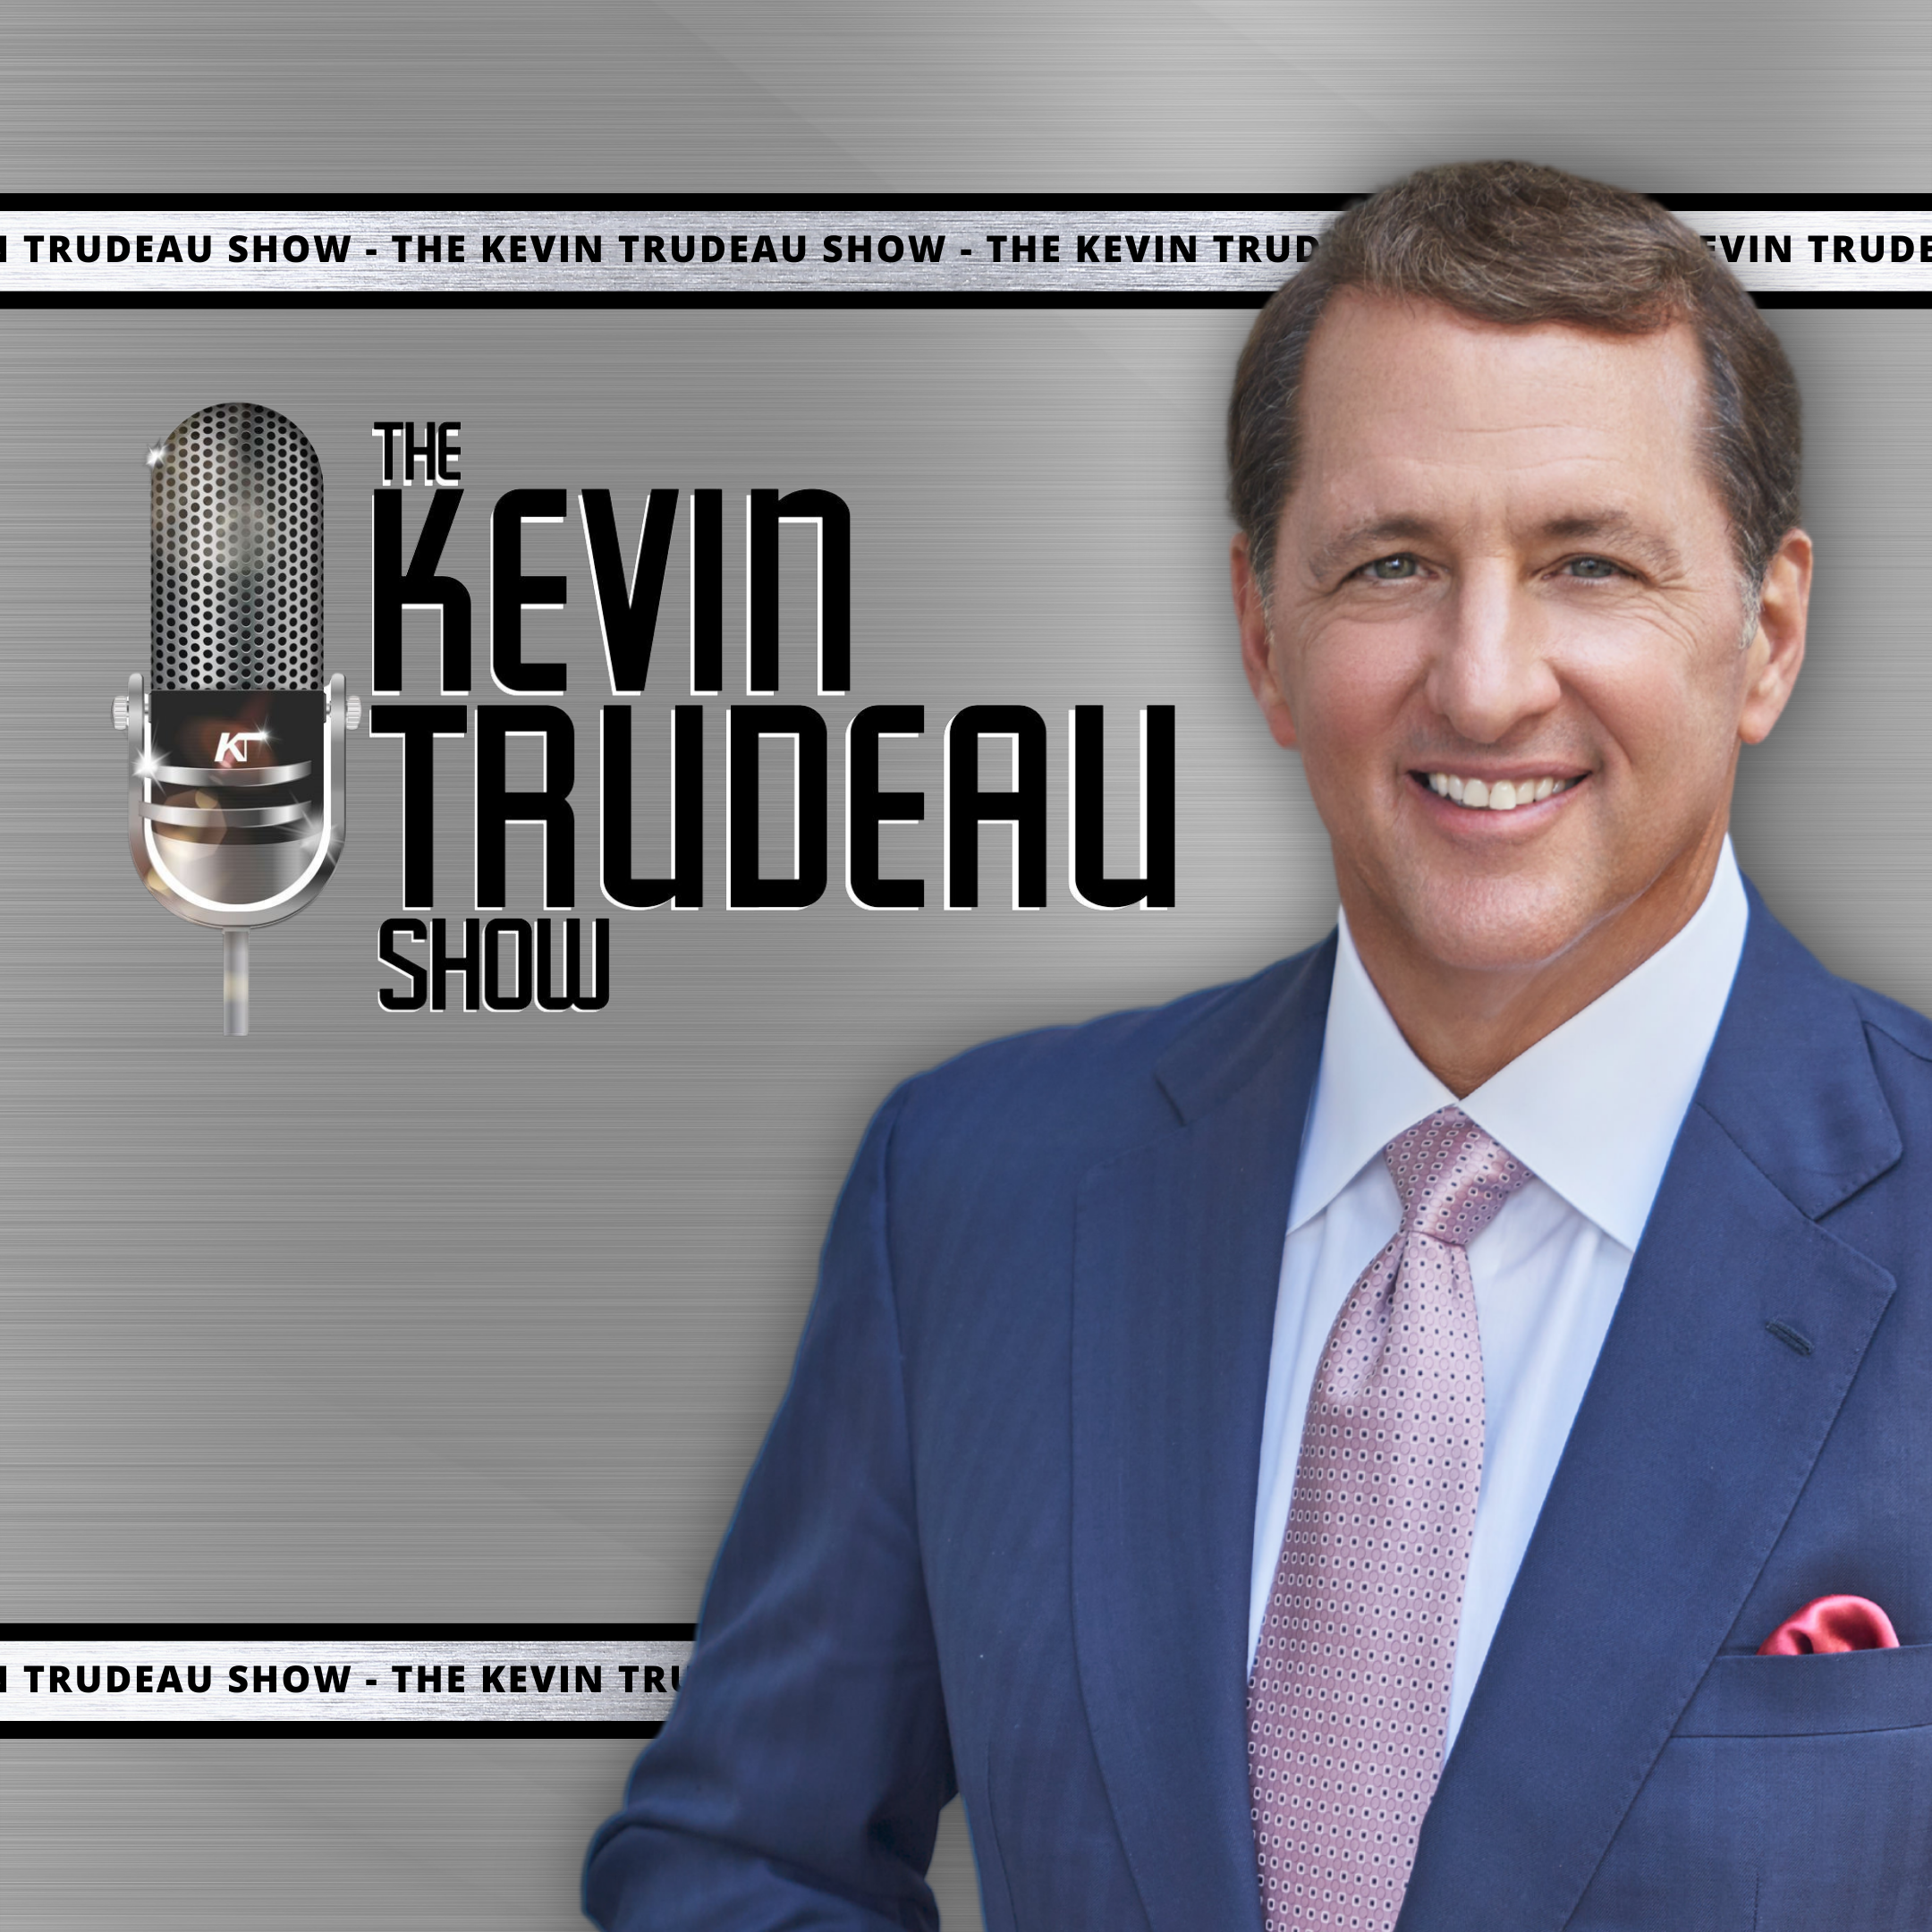 The Kevin Trudeau Show